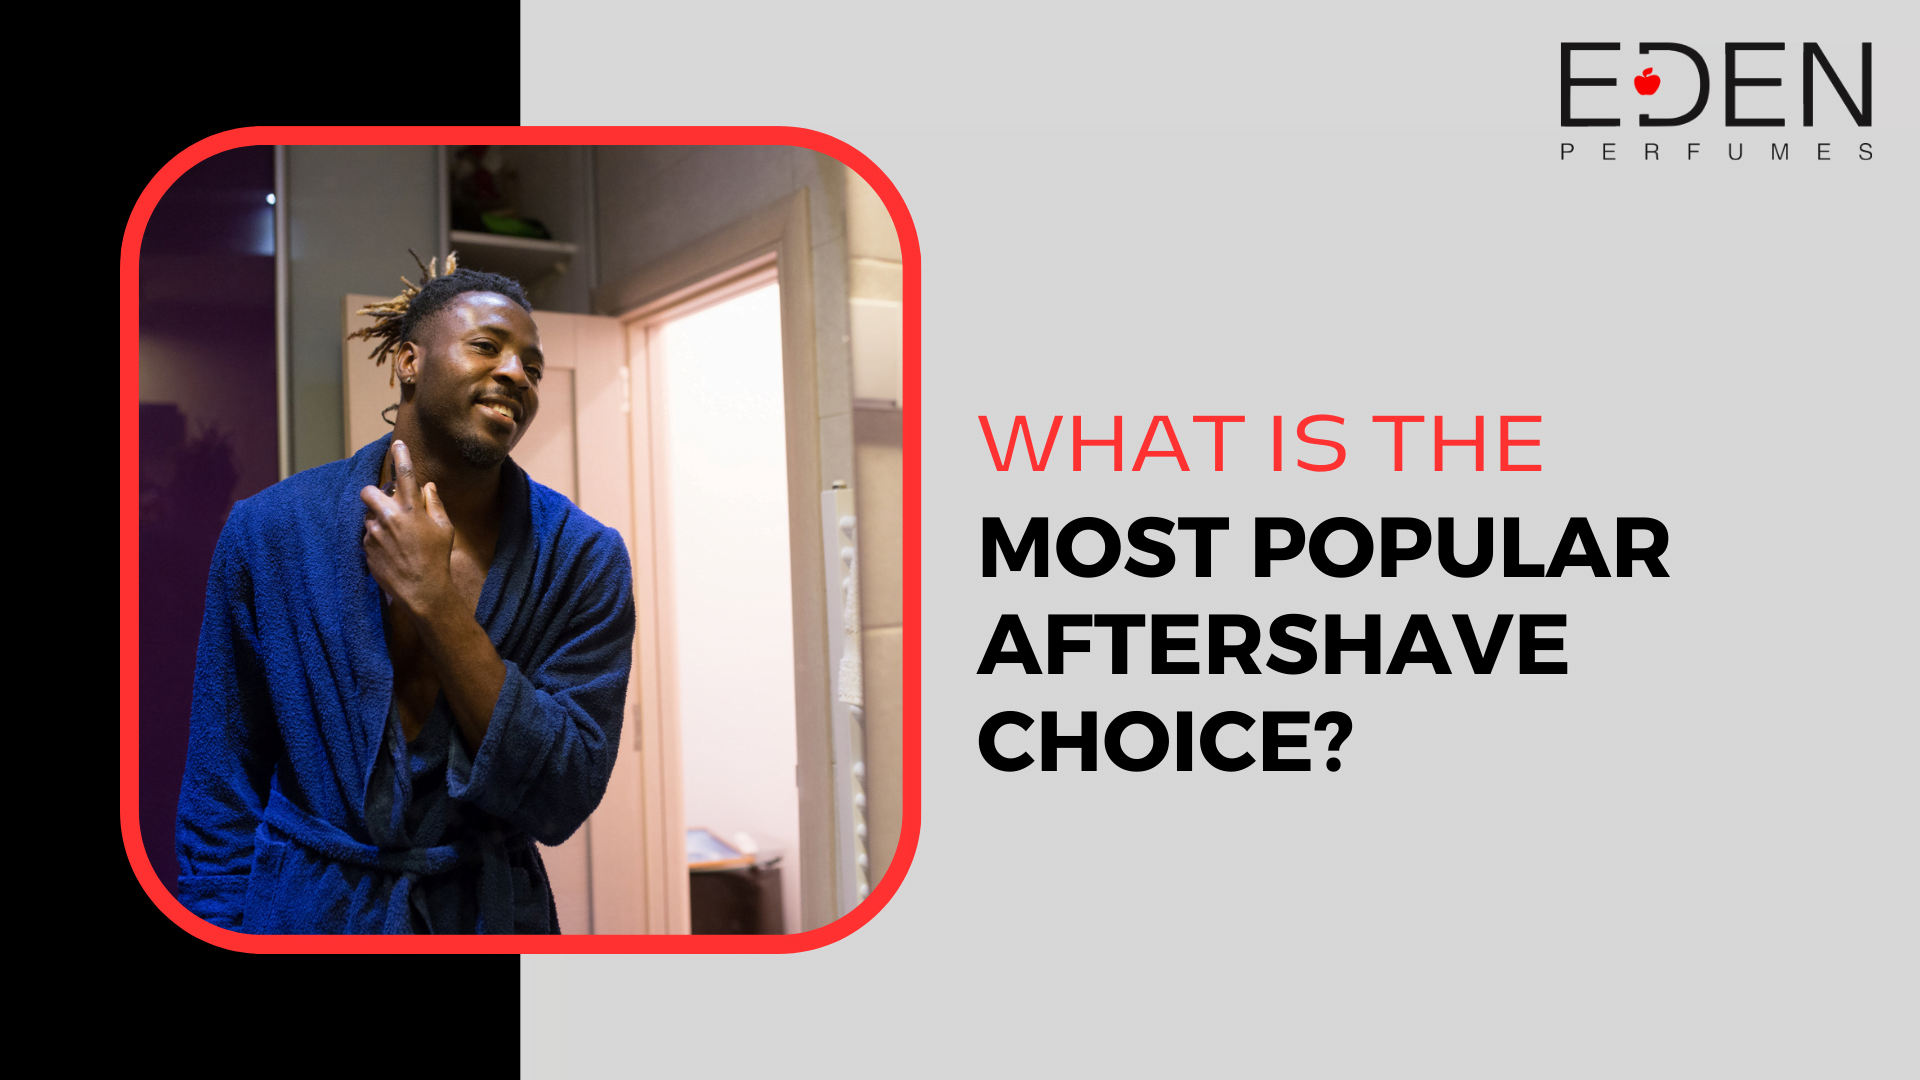 What is the most popular aftershave choice?